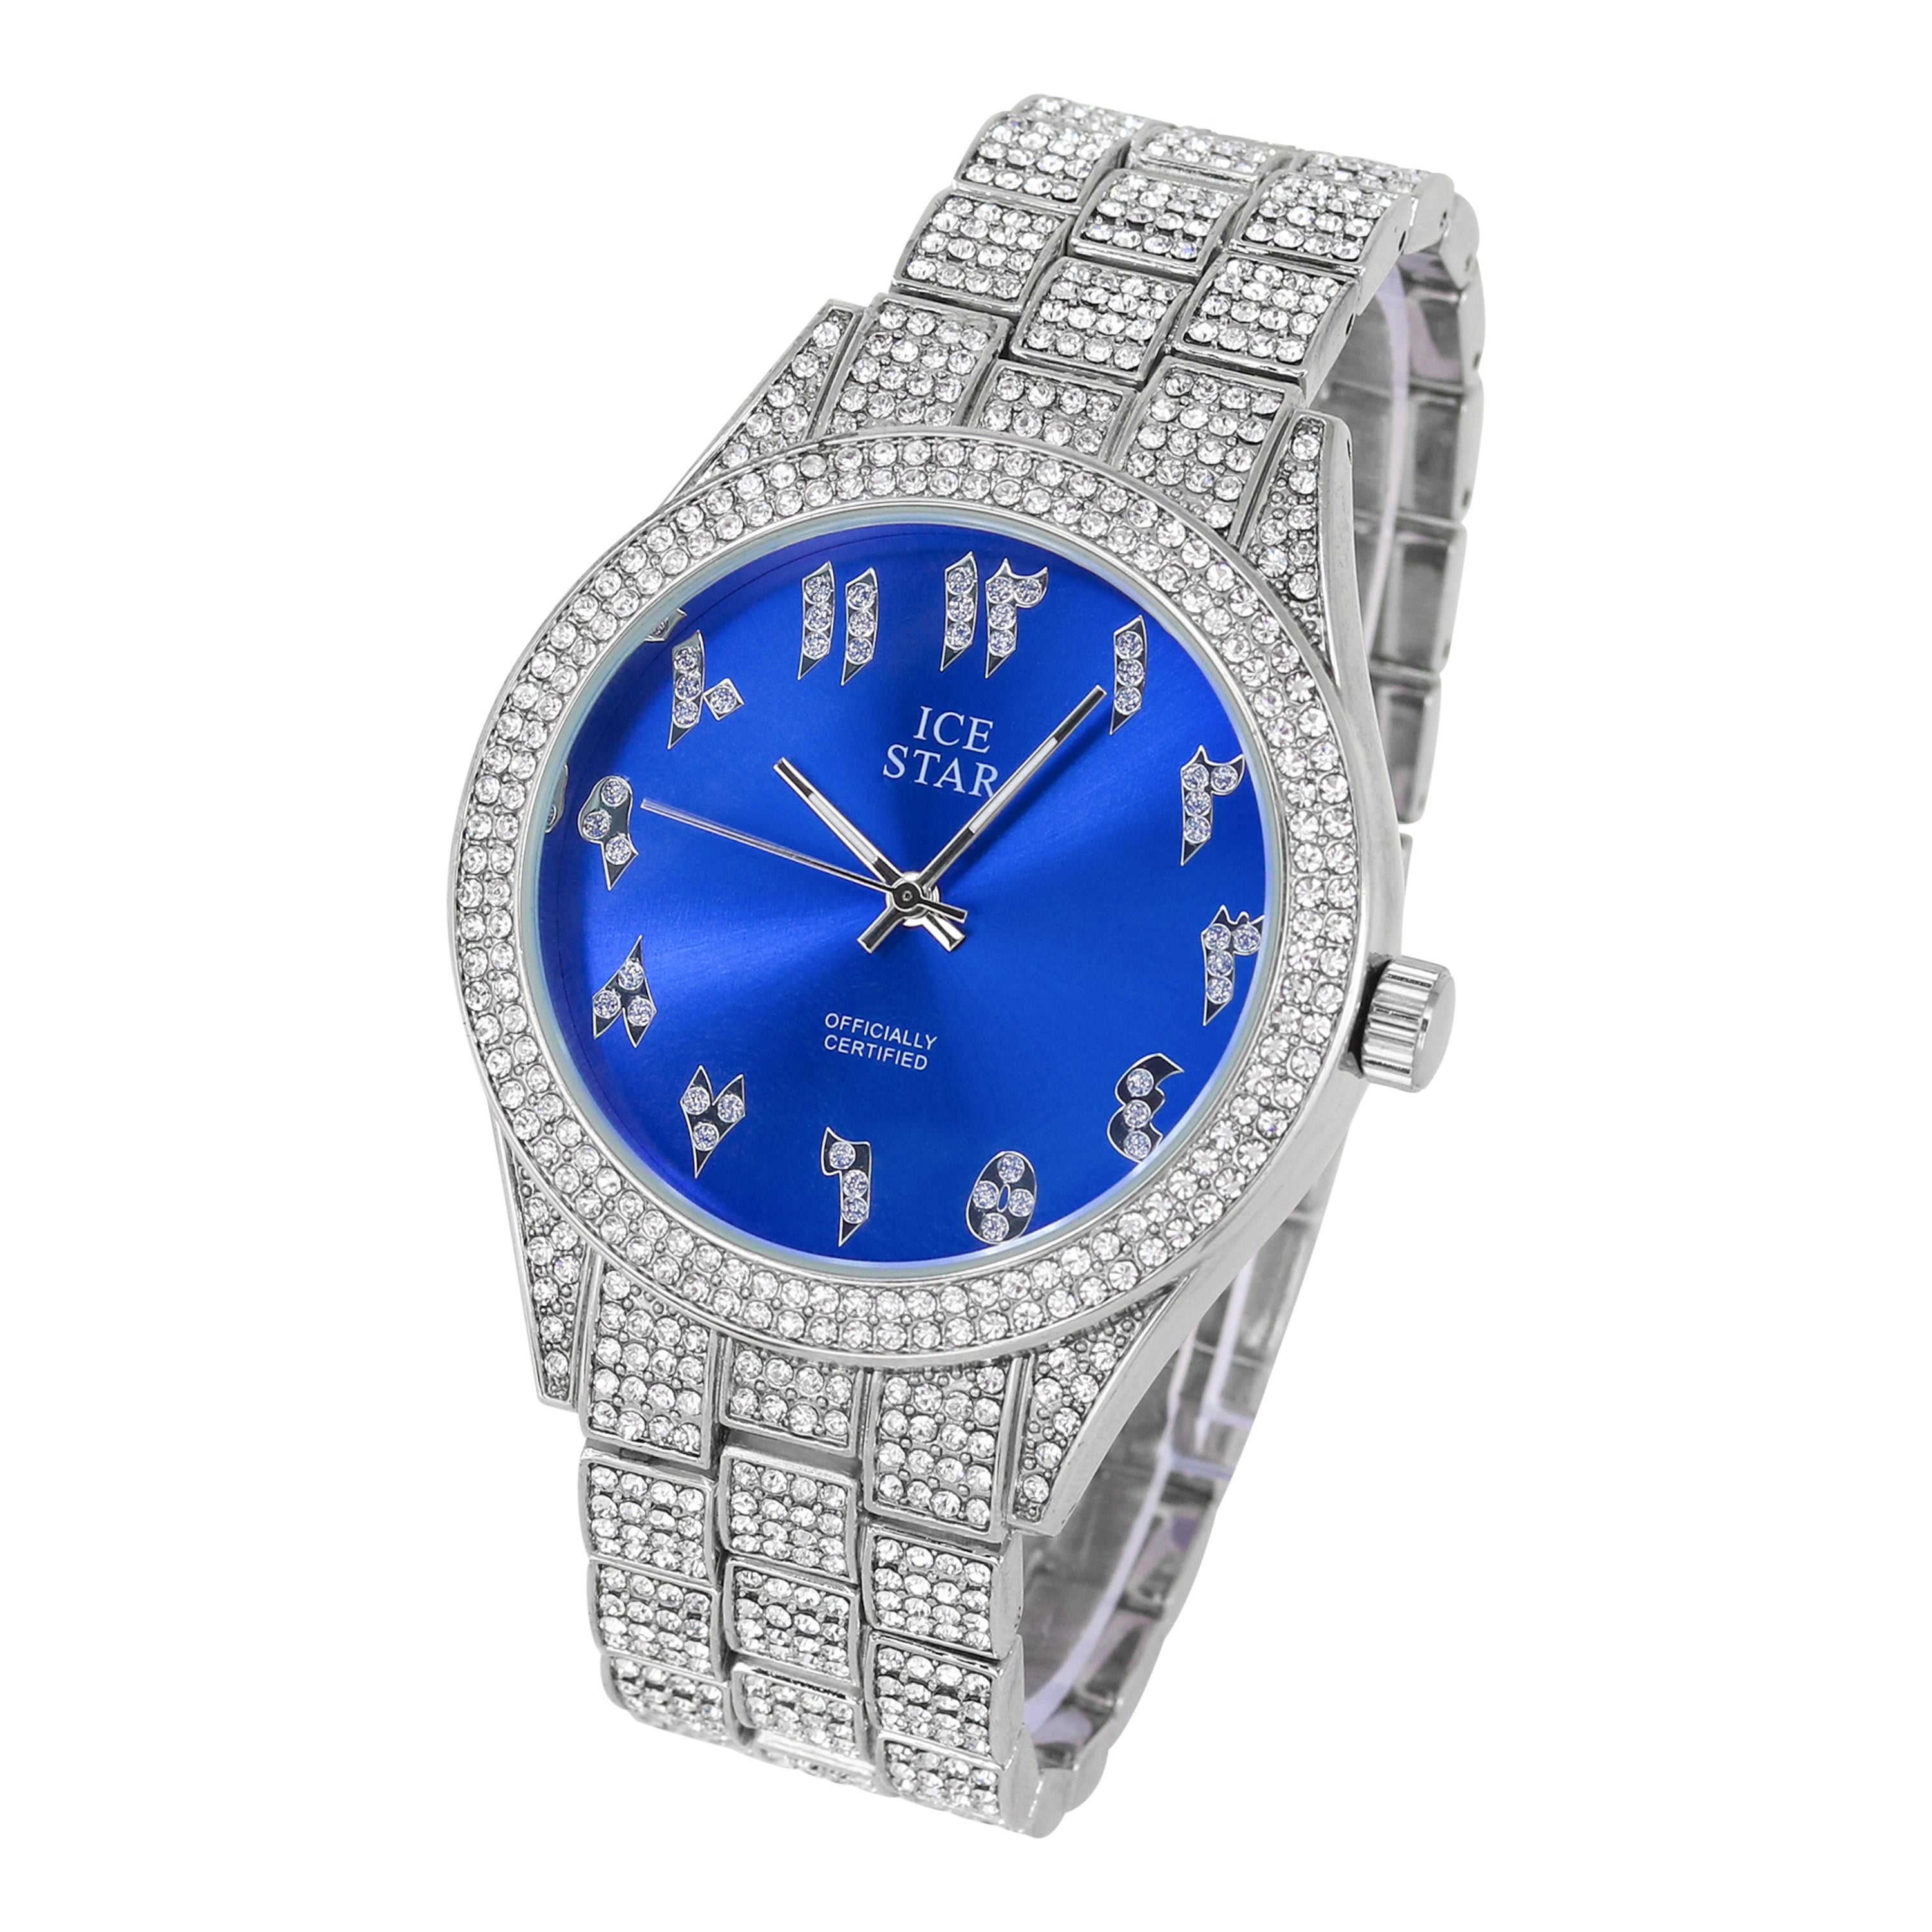 Men's Round Iced Out Watch 43mm Silver - Arabic Dial